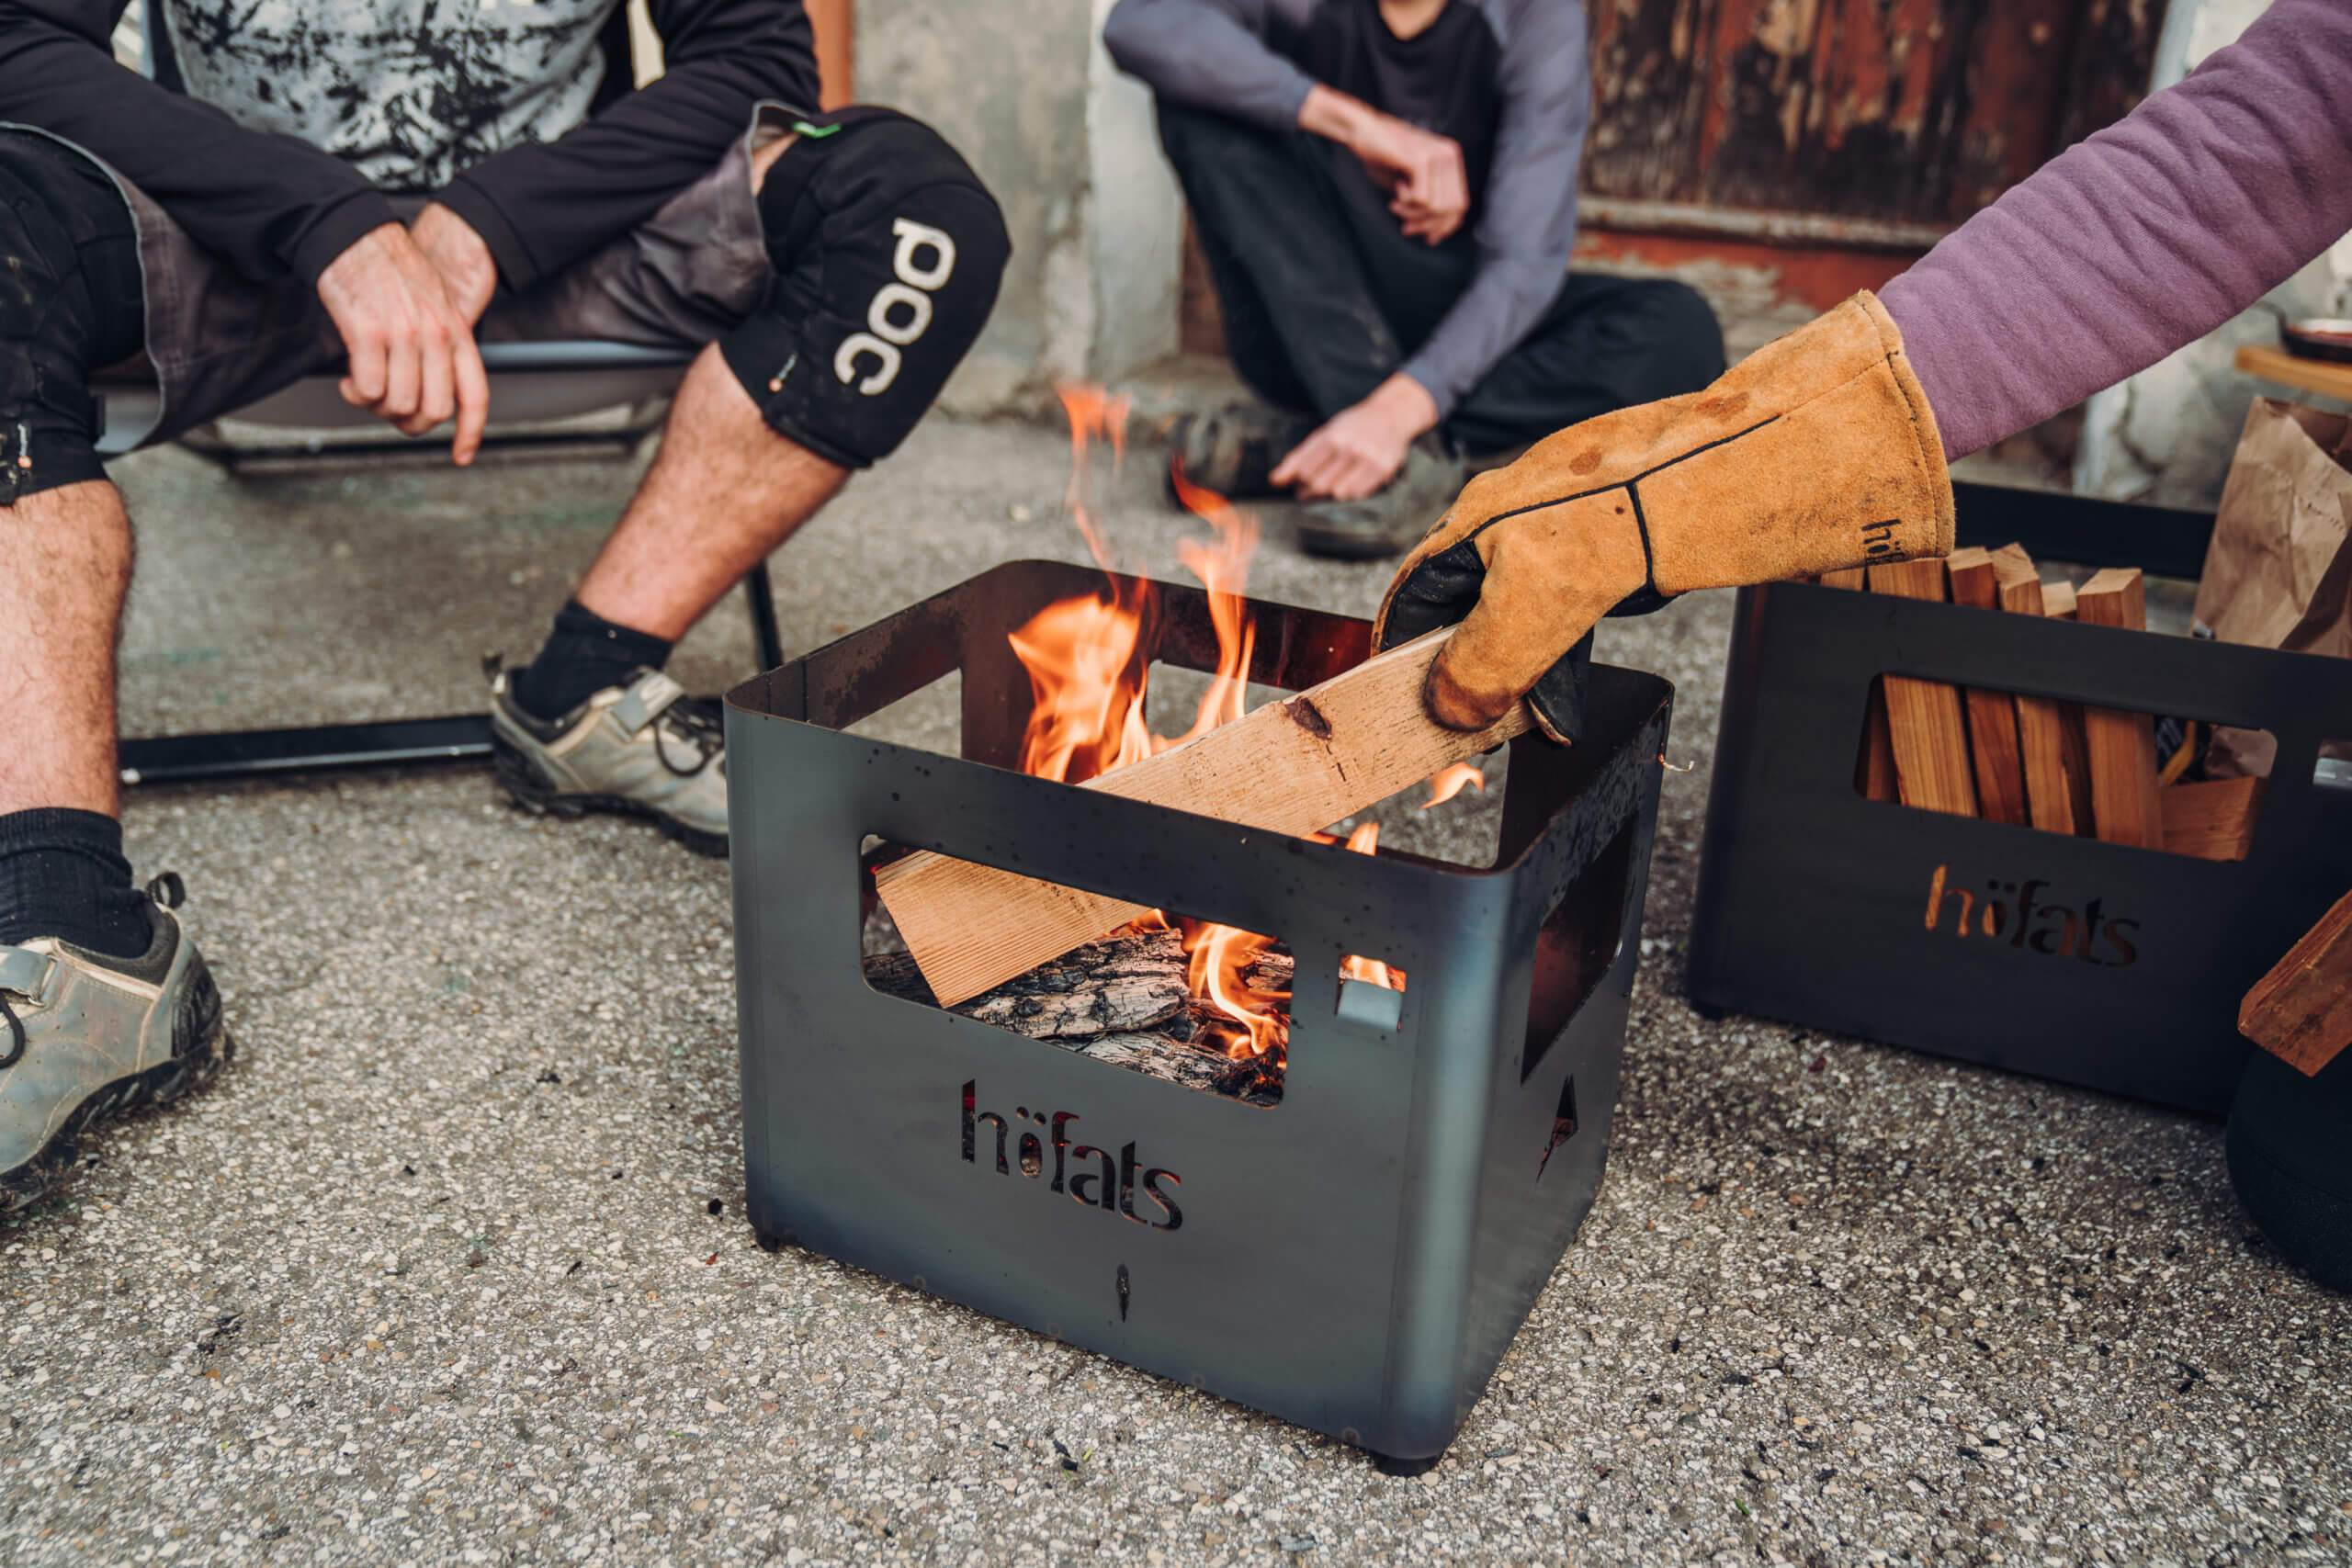 Hofats Beer Box Fire Pit And BBQ 1-2 Day Free Delivery